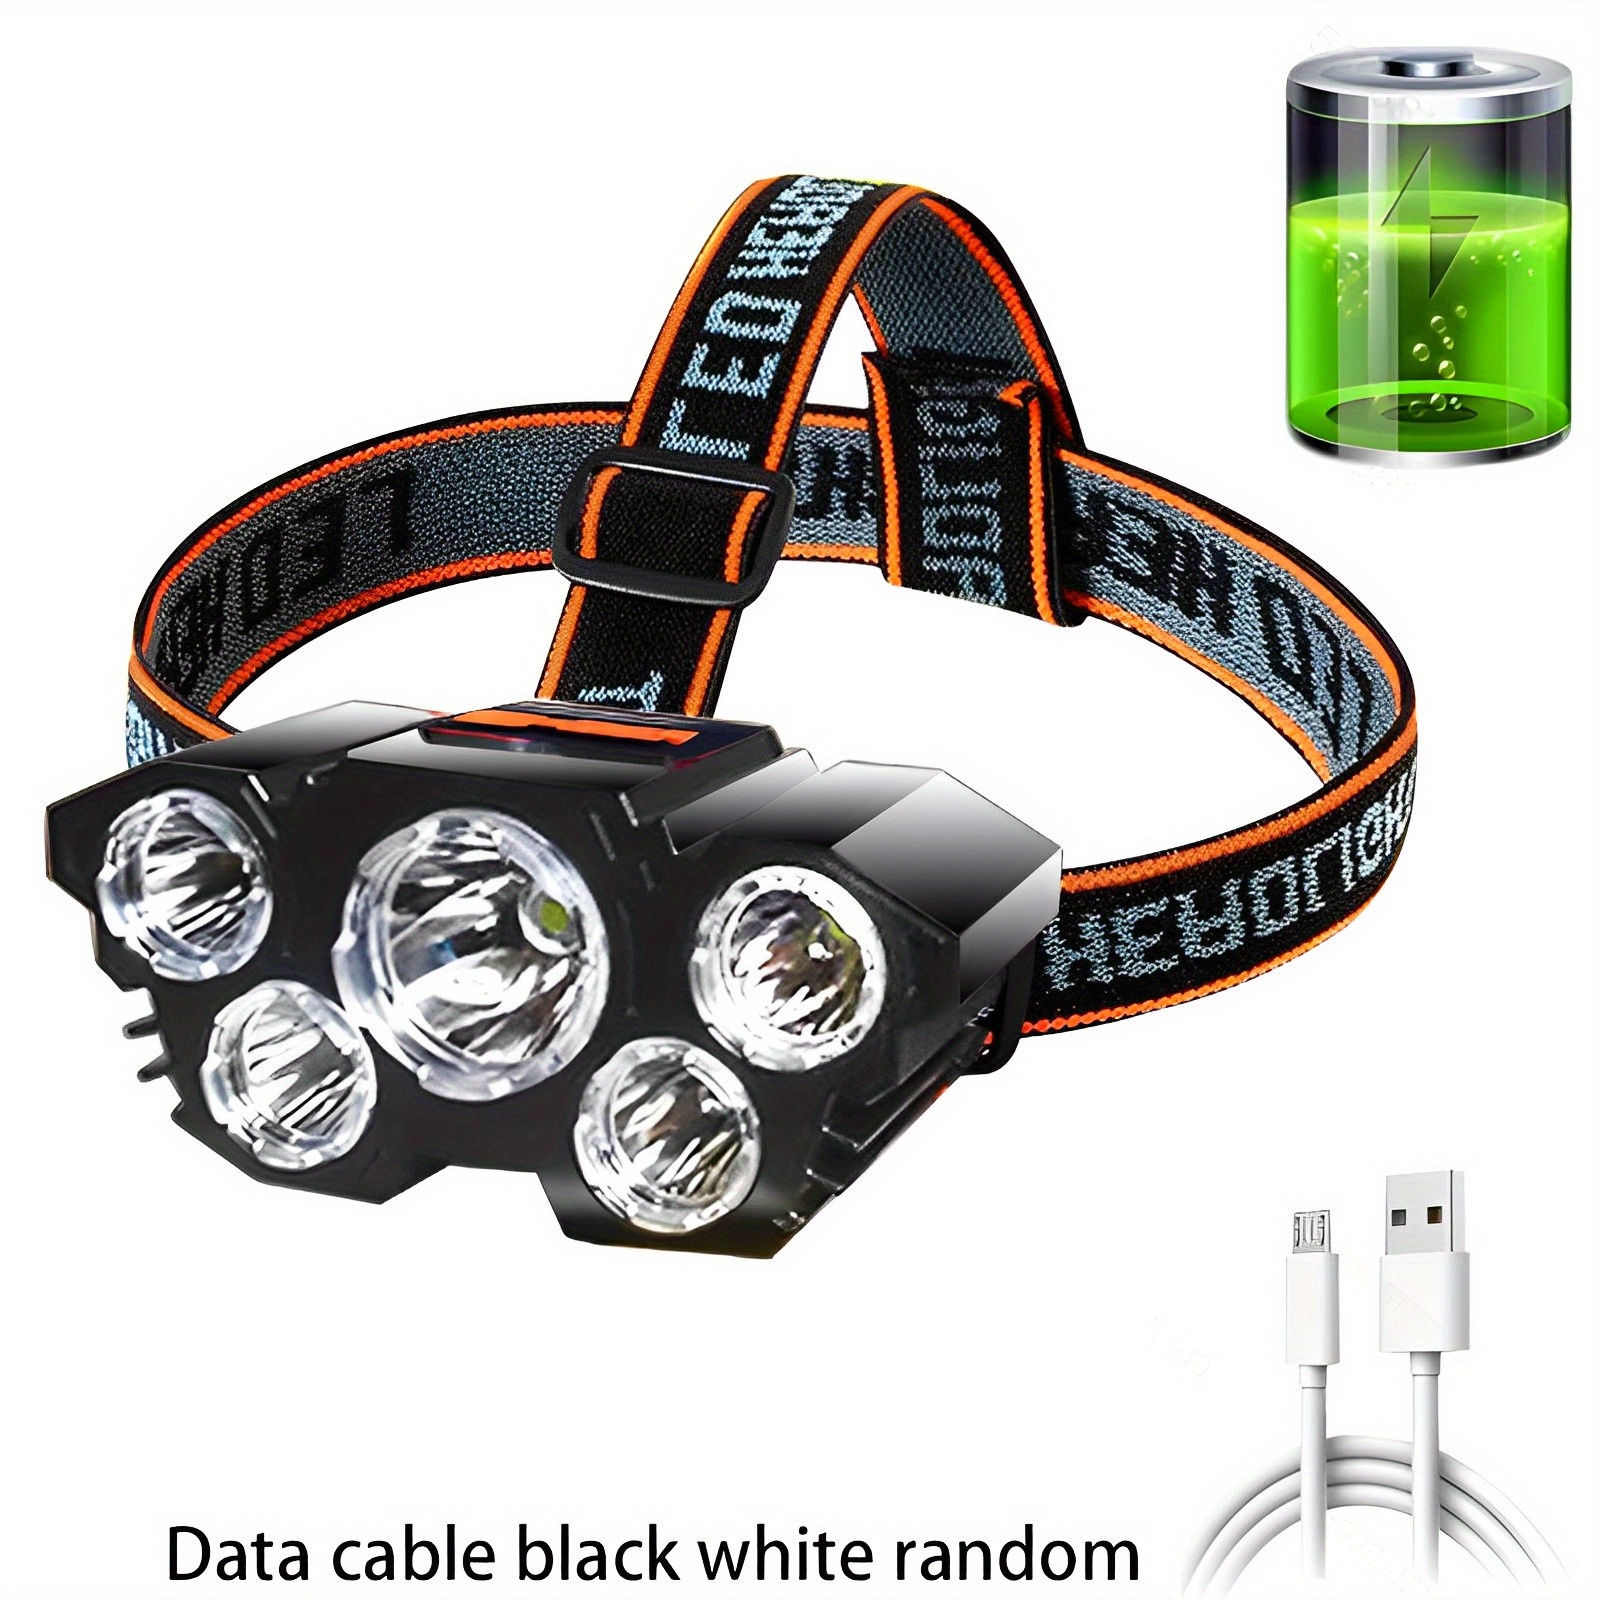 Rechargeable Headlamp, 20000 High Lumen Bright 5 LED Head Lamp with Red  White Light, IPX4 Waterproof Headlight,8 Mode Head Flashlight for Outdoor